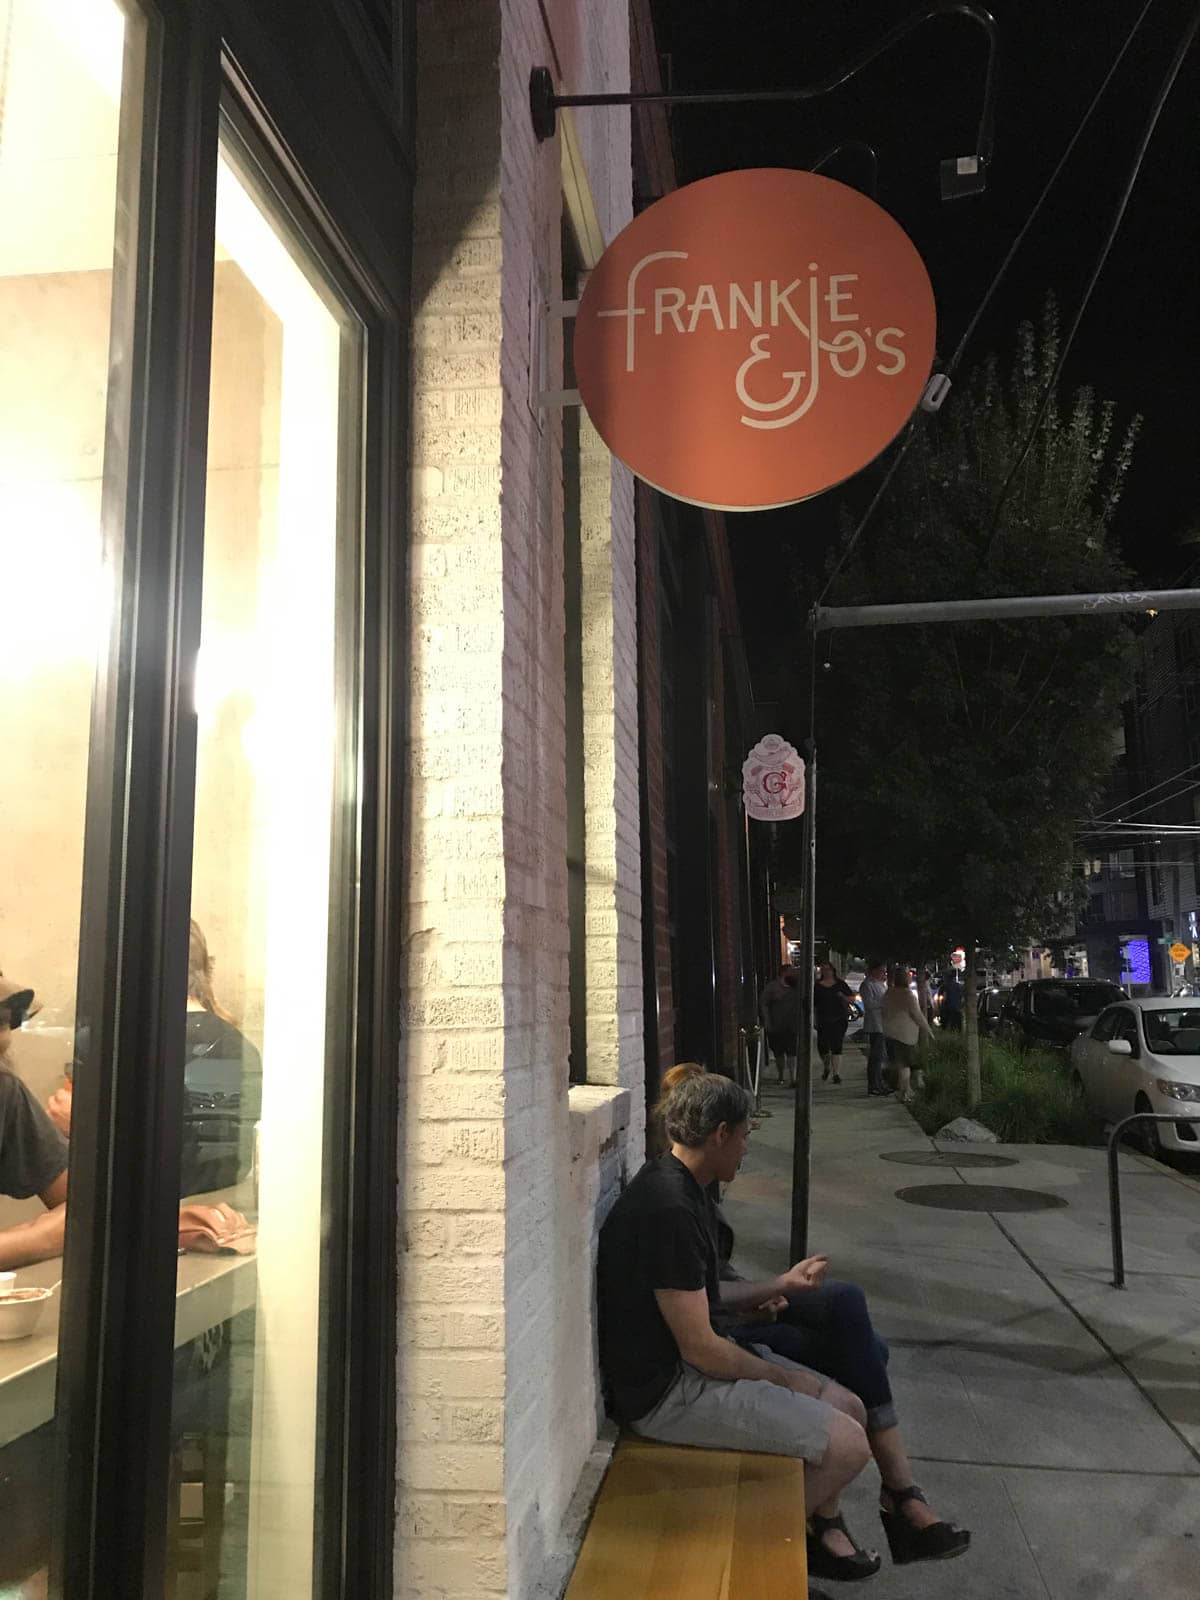 A side view of the outside of an ice cream parlour with a round pink sign reading â€œFrankie & Joâ€™sâ€�. Two people sit on a bench outside the parlour, and some people can be seen sitting inside though the glass window.